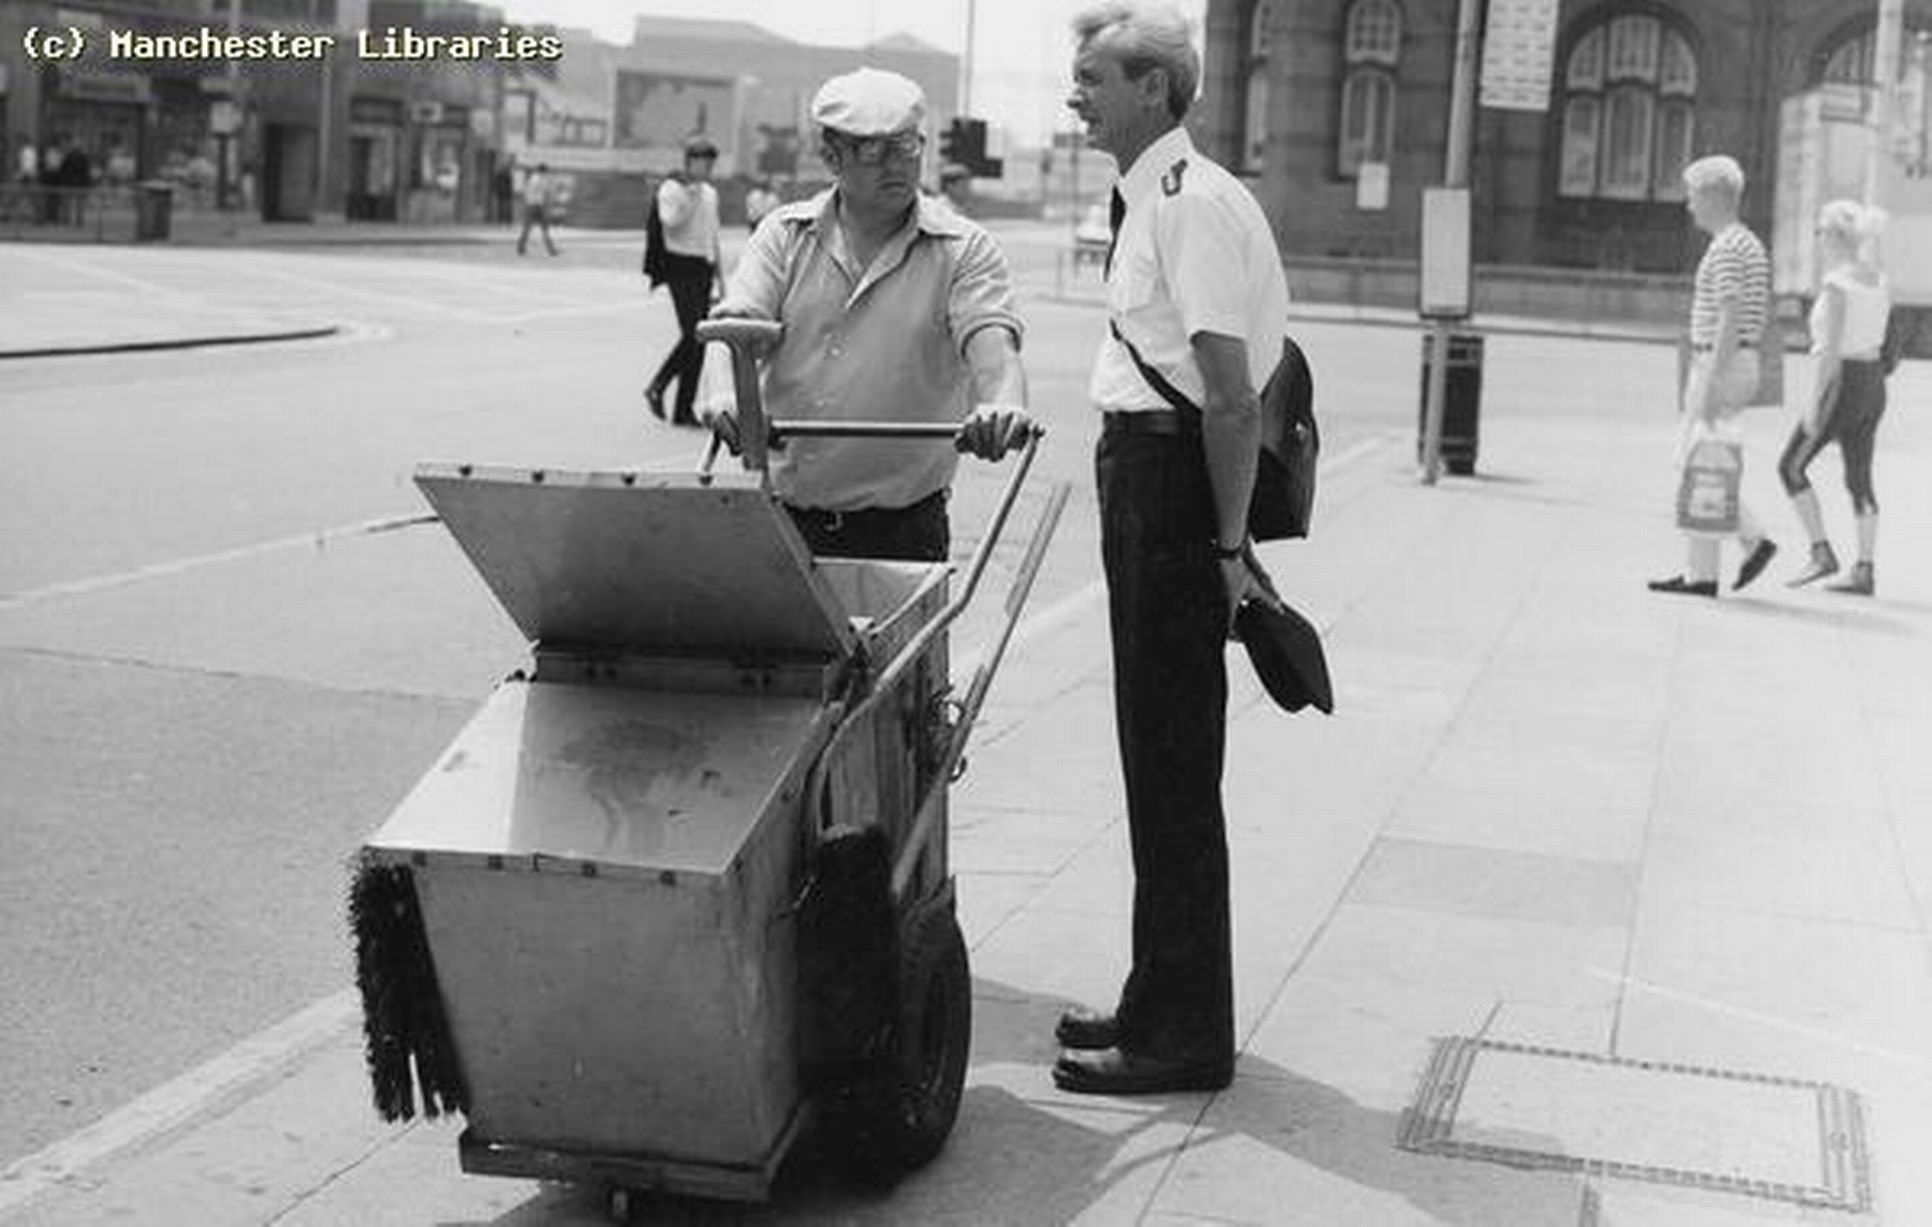 Street cleaner in Manchester